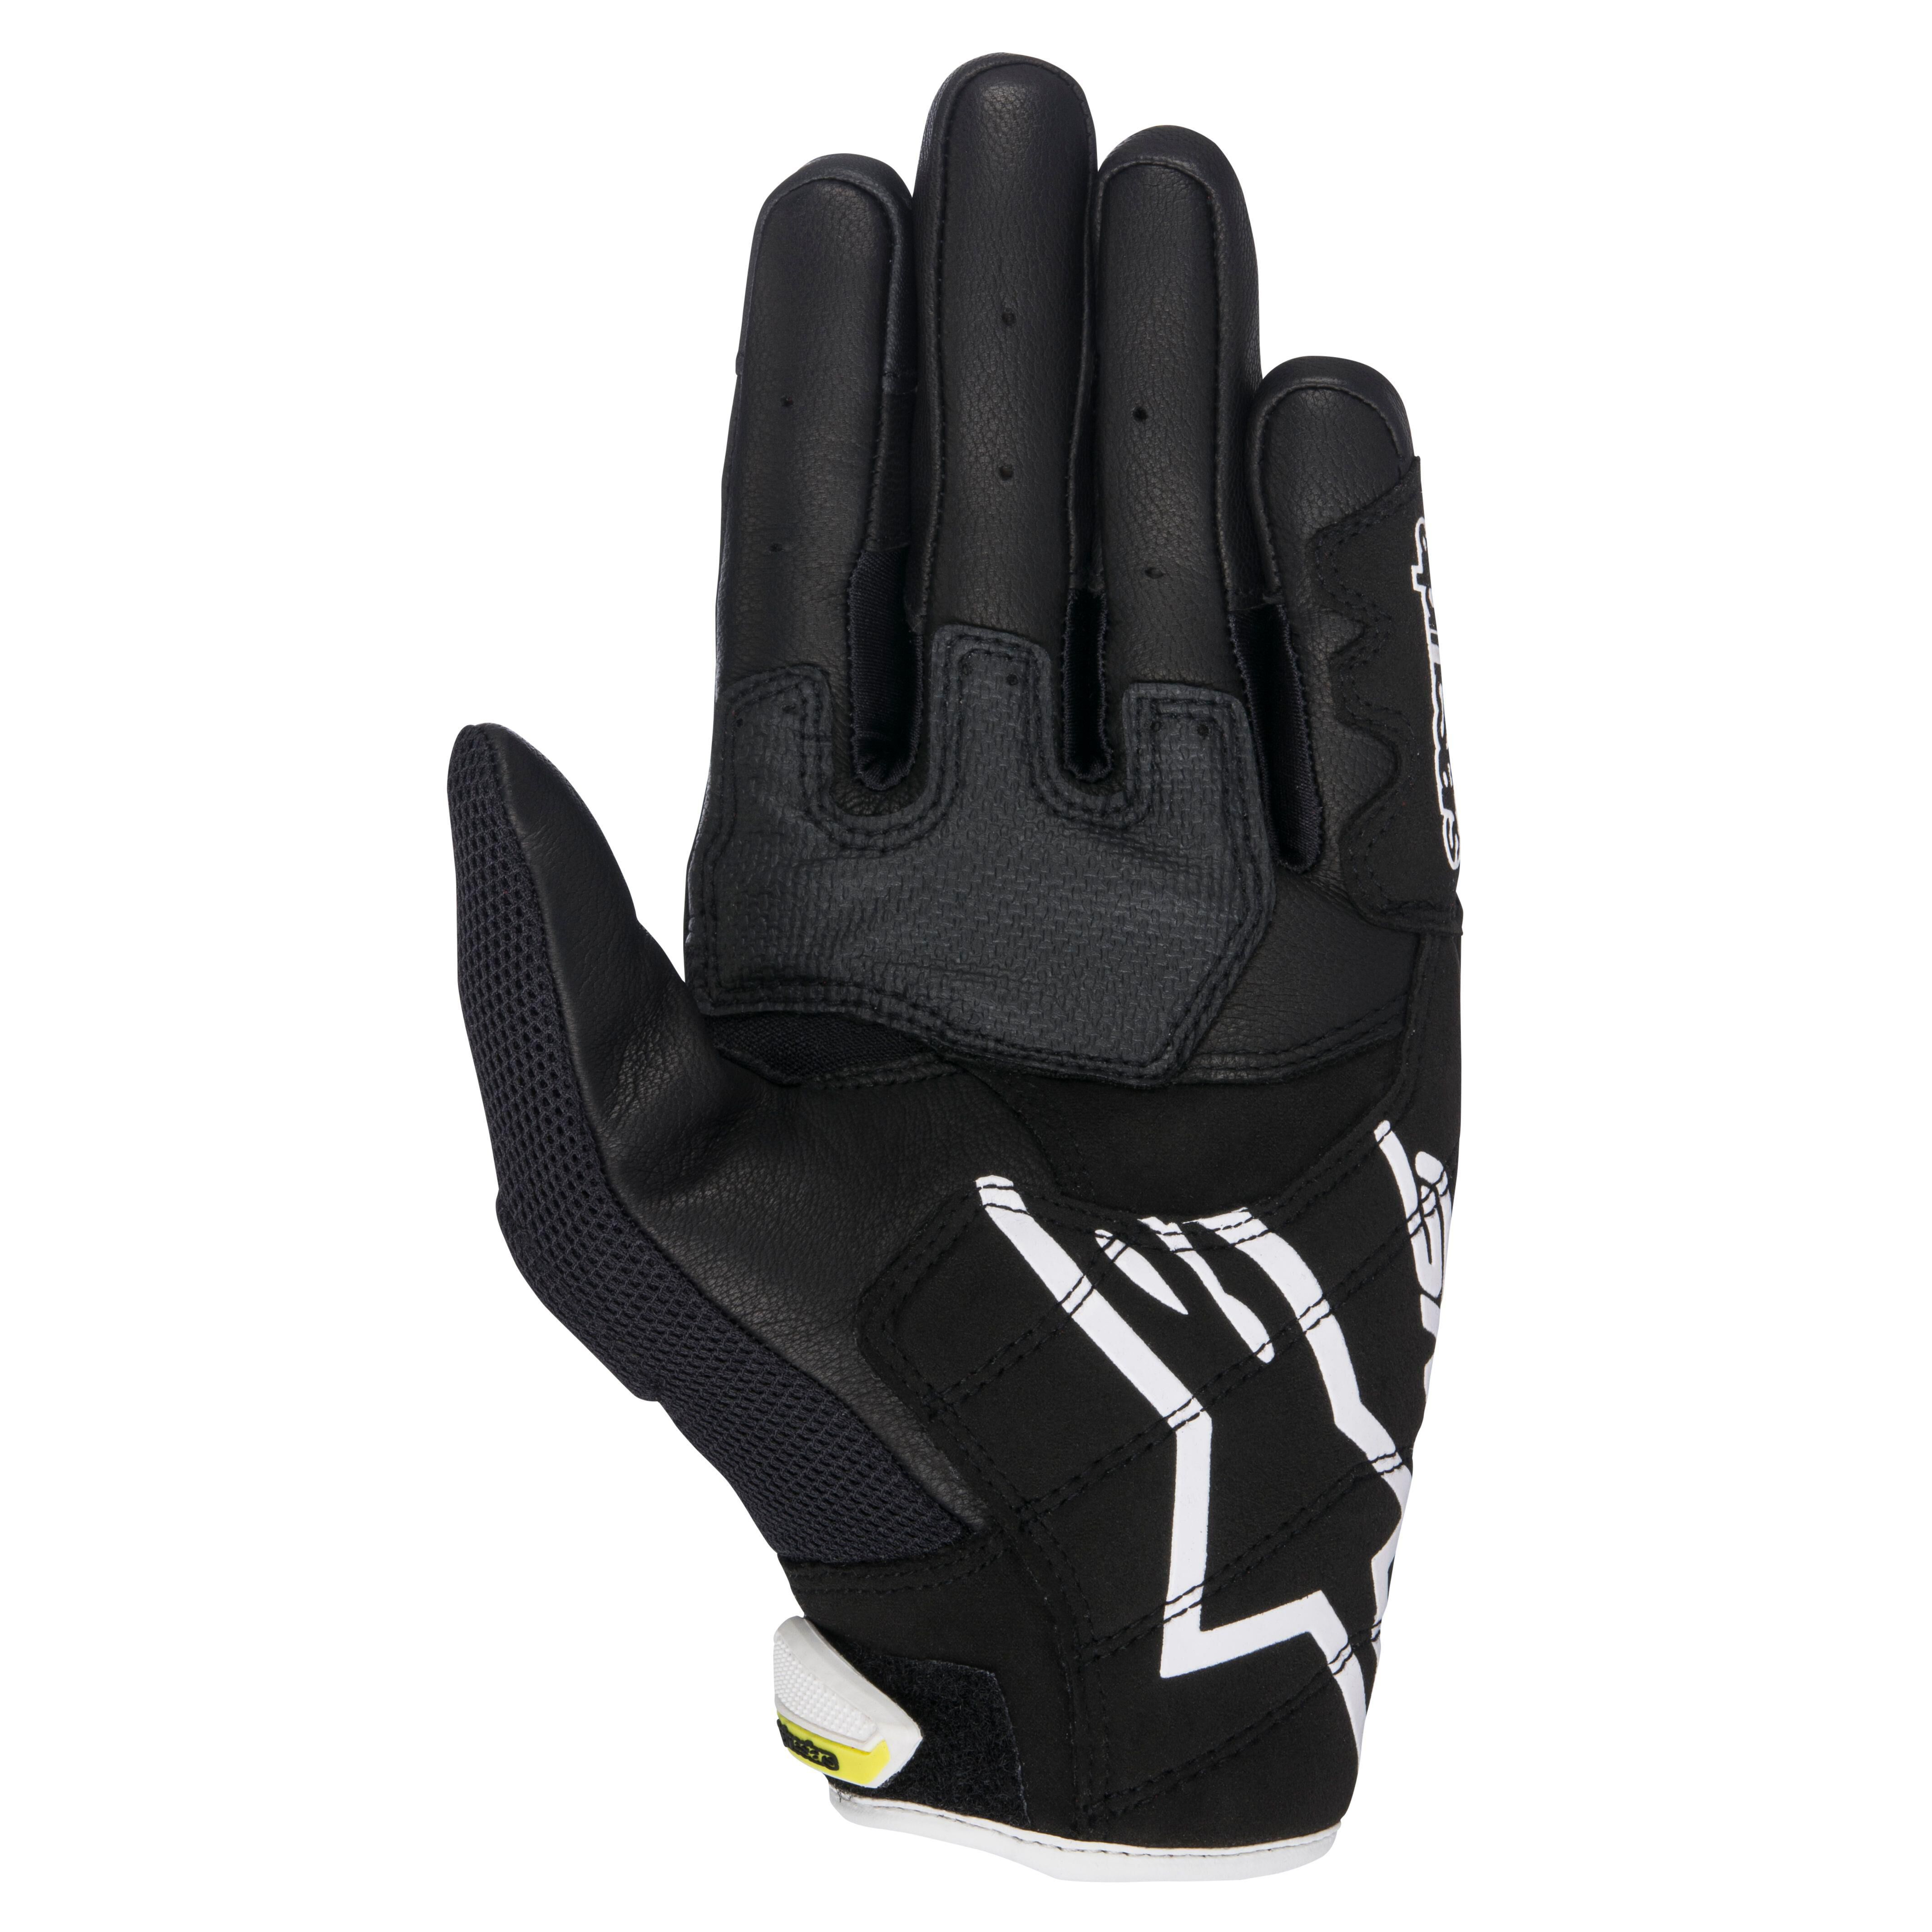 *SHIPS SAME DAY* ALPINESTARS  SMX-2 AIR CARBON LEATHER Motorcycle Gloves 